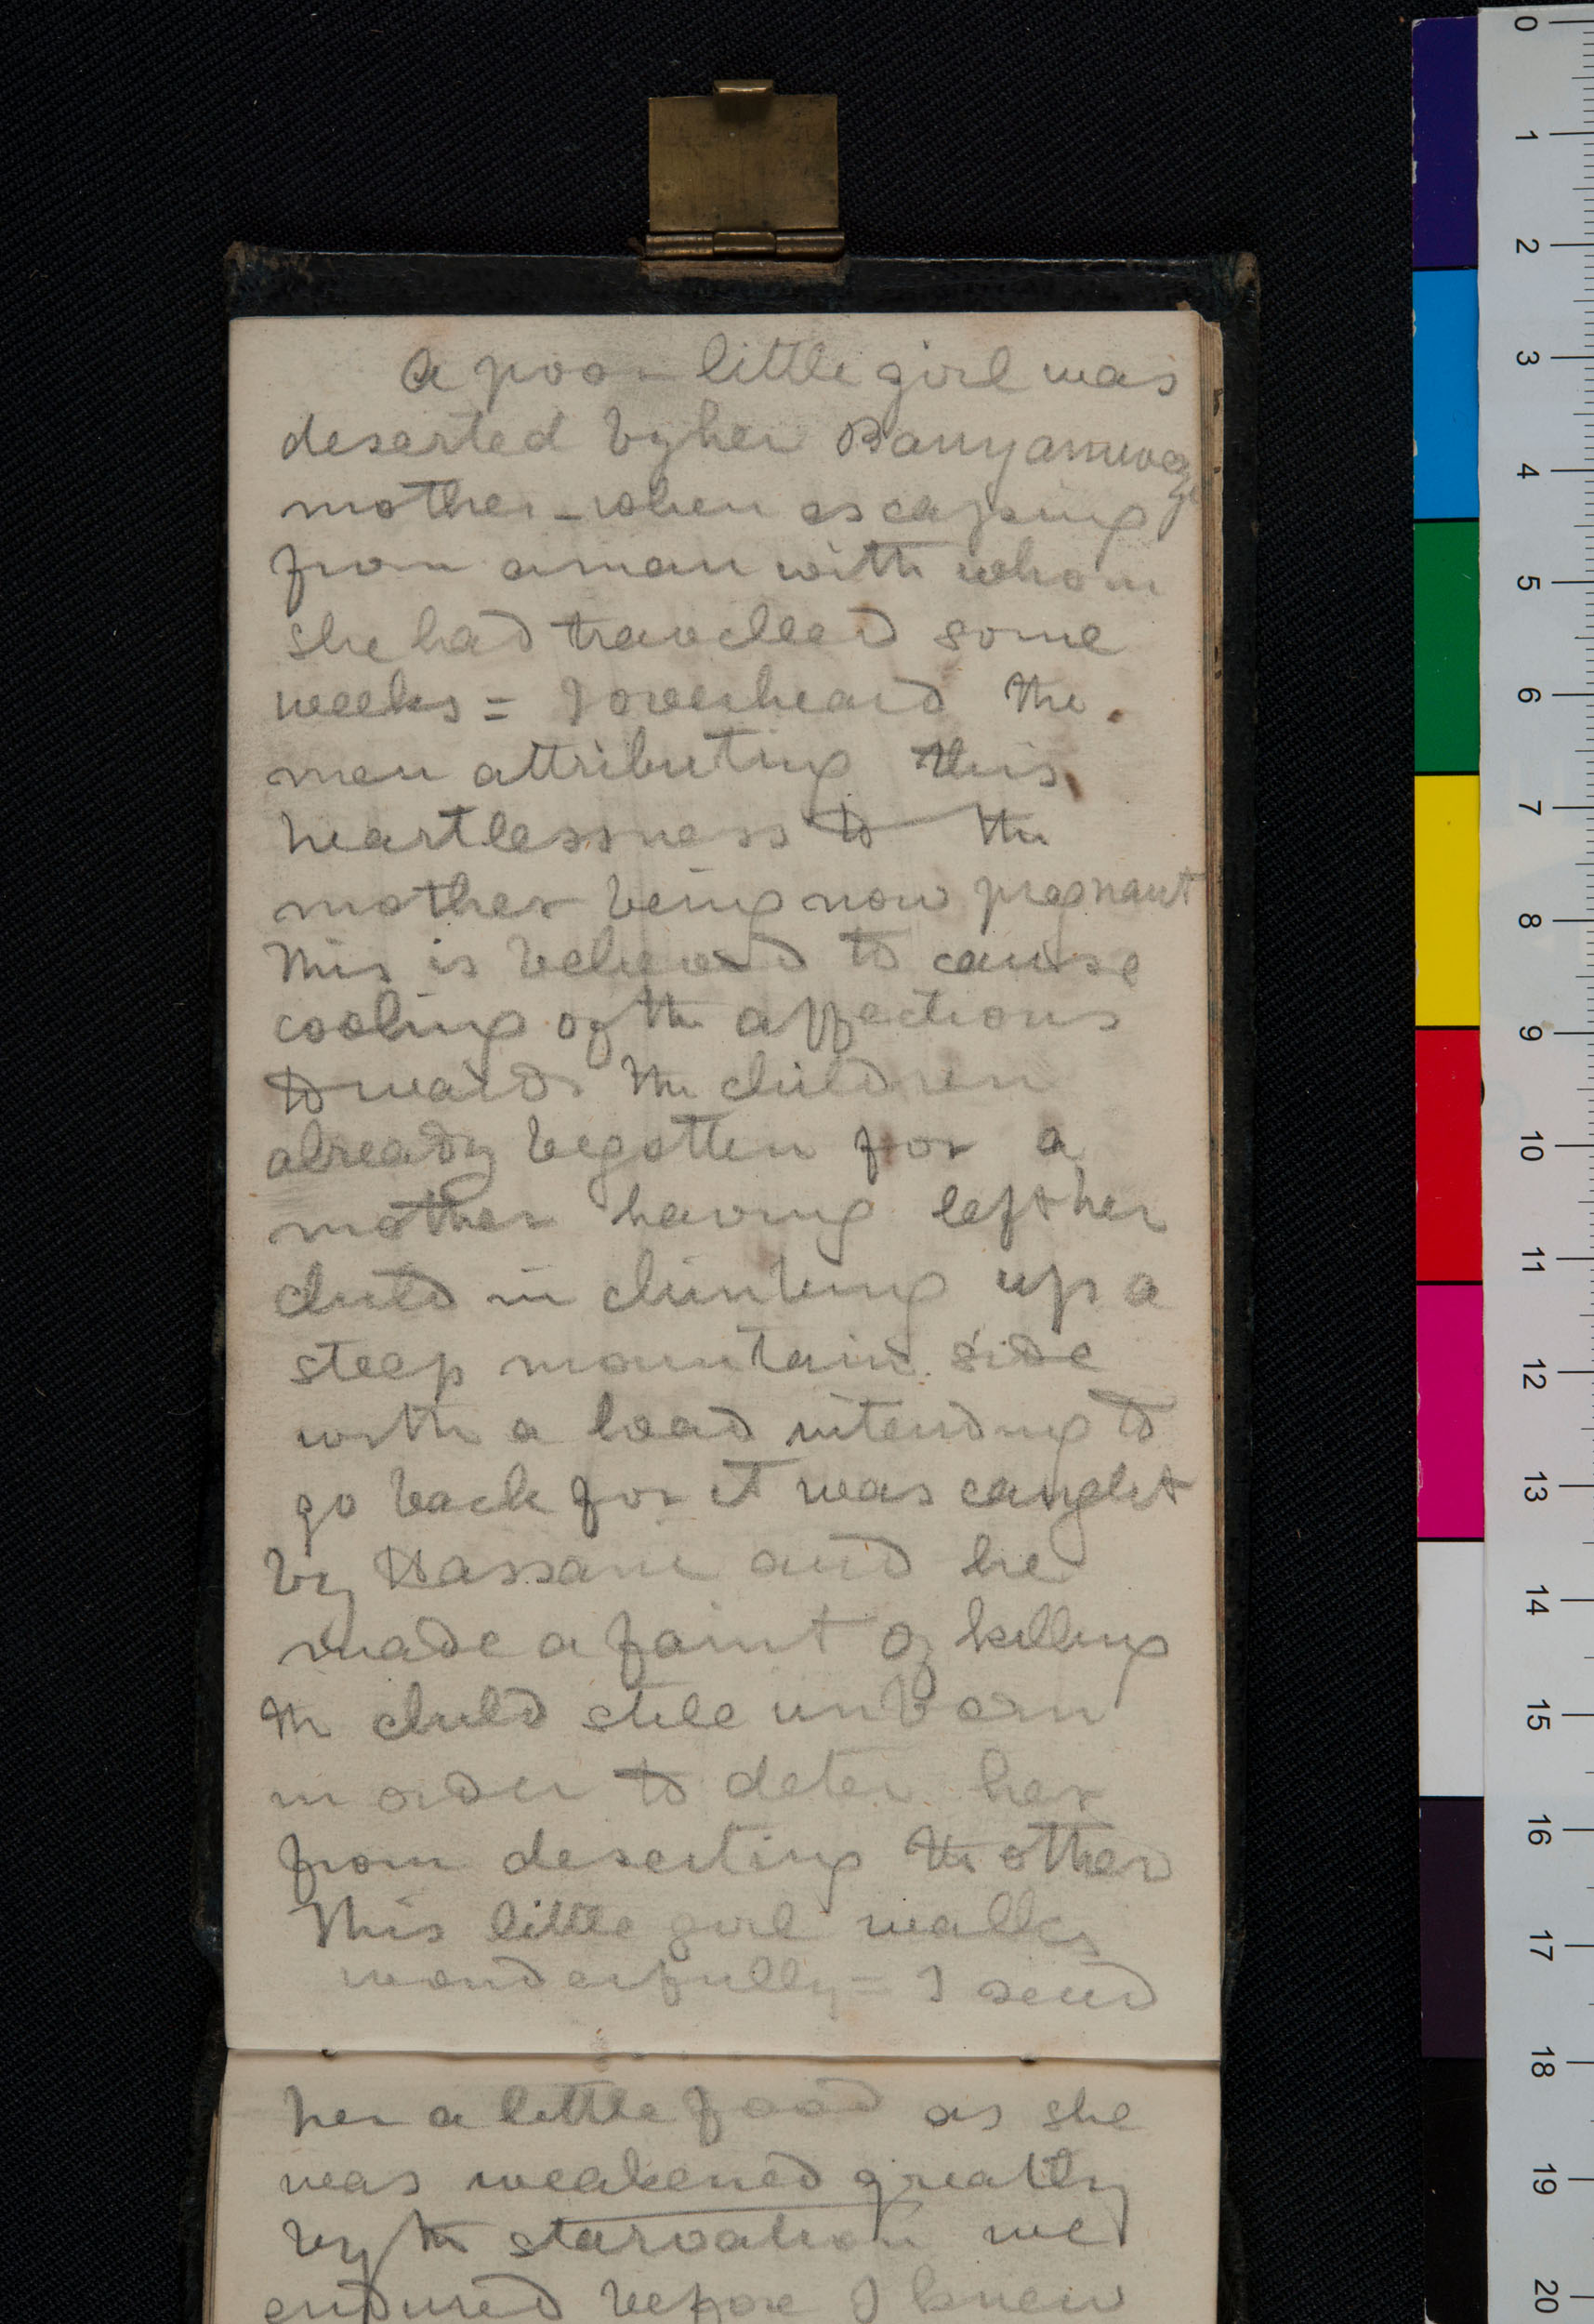 A page from David Livingstone, Field Diary XVI (1872h:[163]). Copyright David Livingstone Centre, University of Glasgow Photographic Unit, and Dr. Neil Imray Livingstone Wilson (as relevant). Creative Commons Attribution-NonCommercial 3.0 Unported (https://creativecommons.org/licenses/by-nc/3.0/).